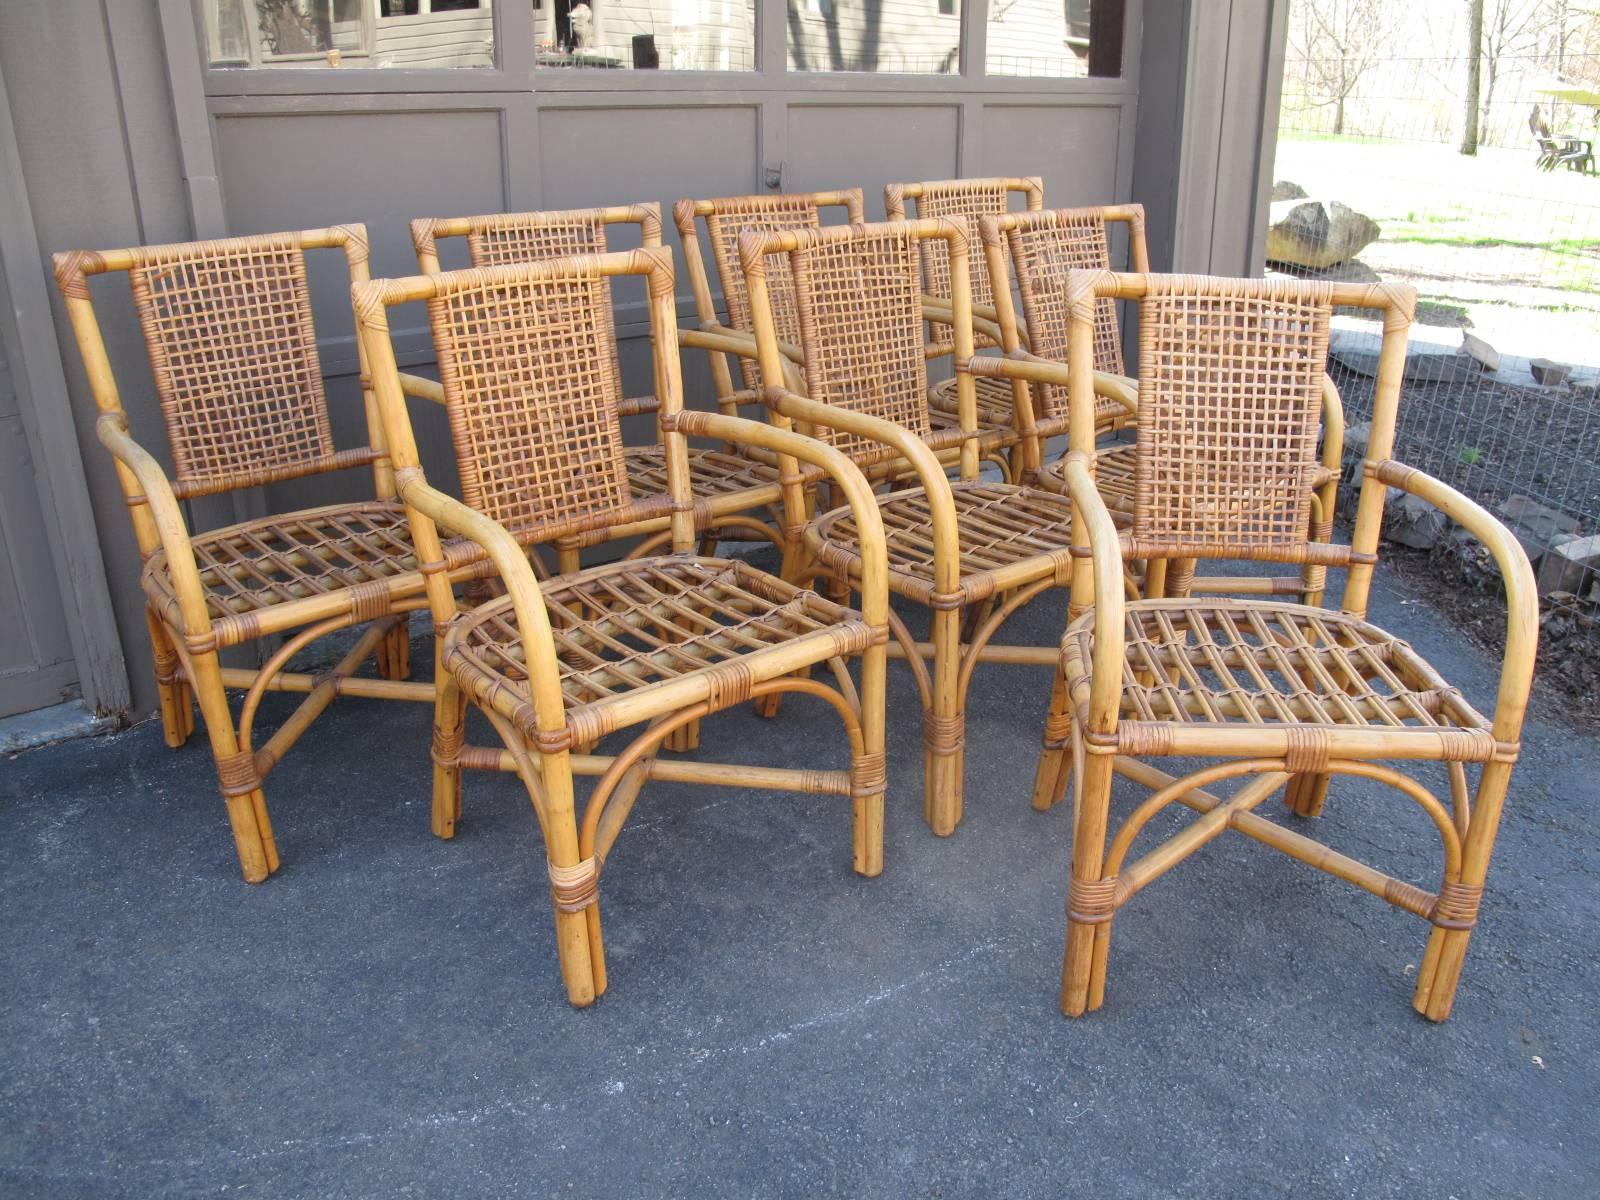 Four (remaining of original eight pictured) wrapped bamboo garden chairs. Striped blue and white foam cushions. Sold individually. Please contact us for group pricing.

Seat height without cushions: 16.5".